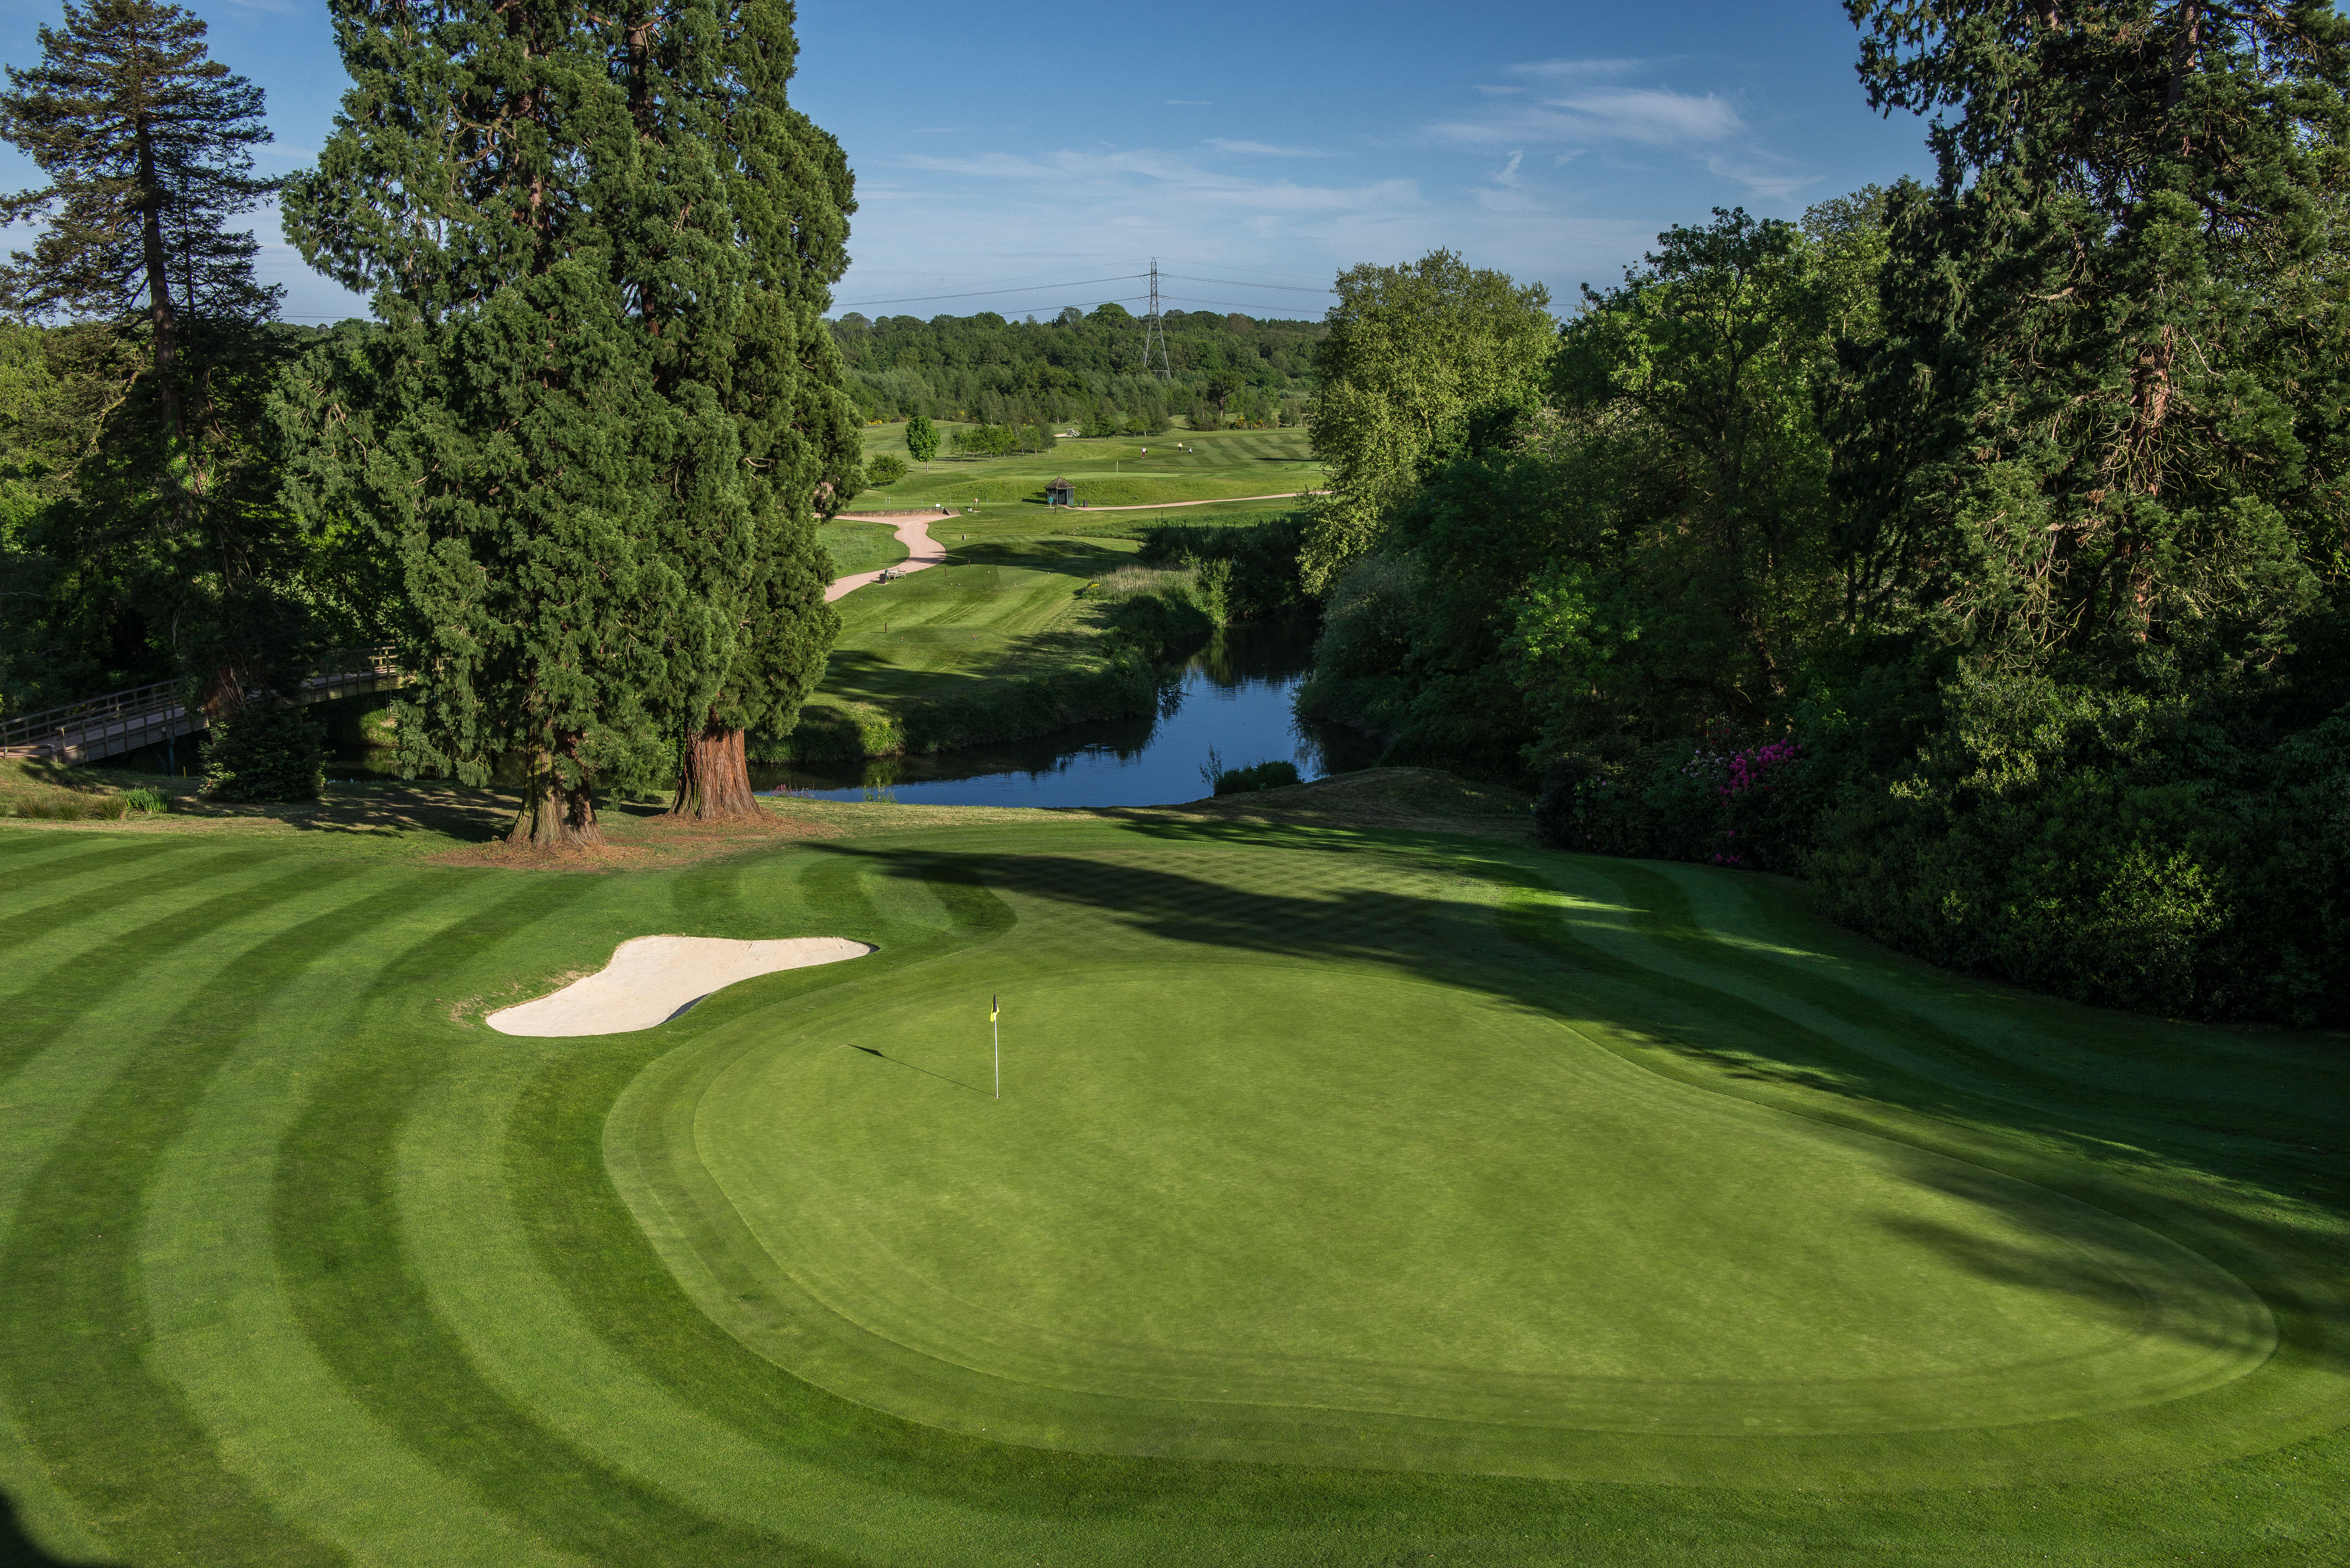 The par-three 18th hole, which is 161 yards from the white tees